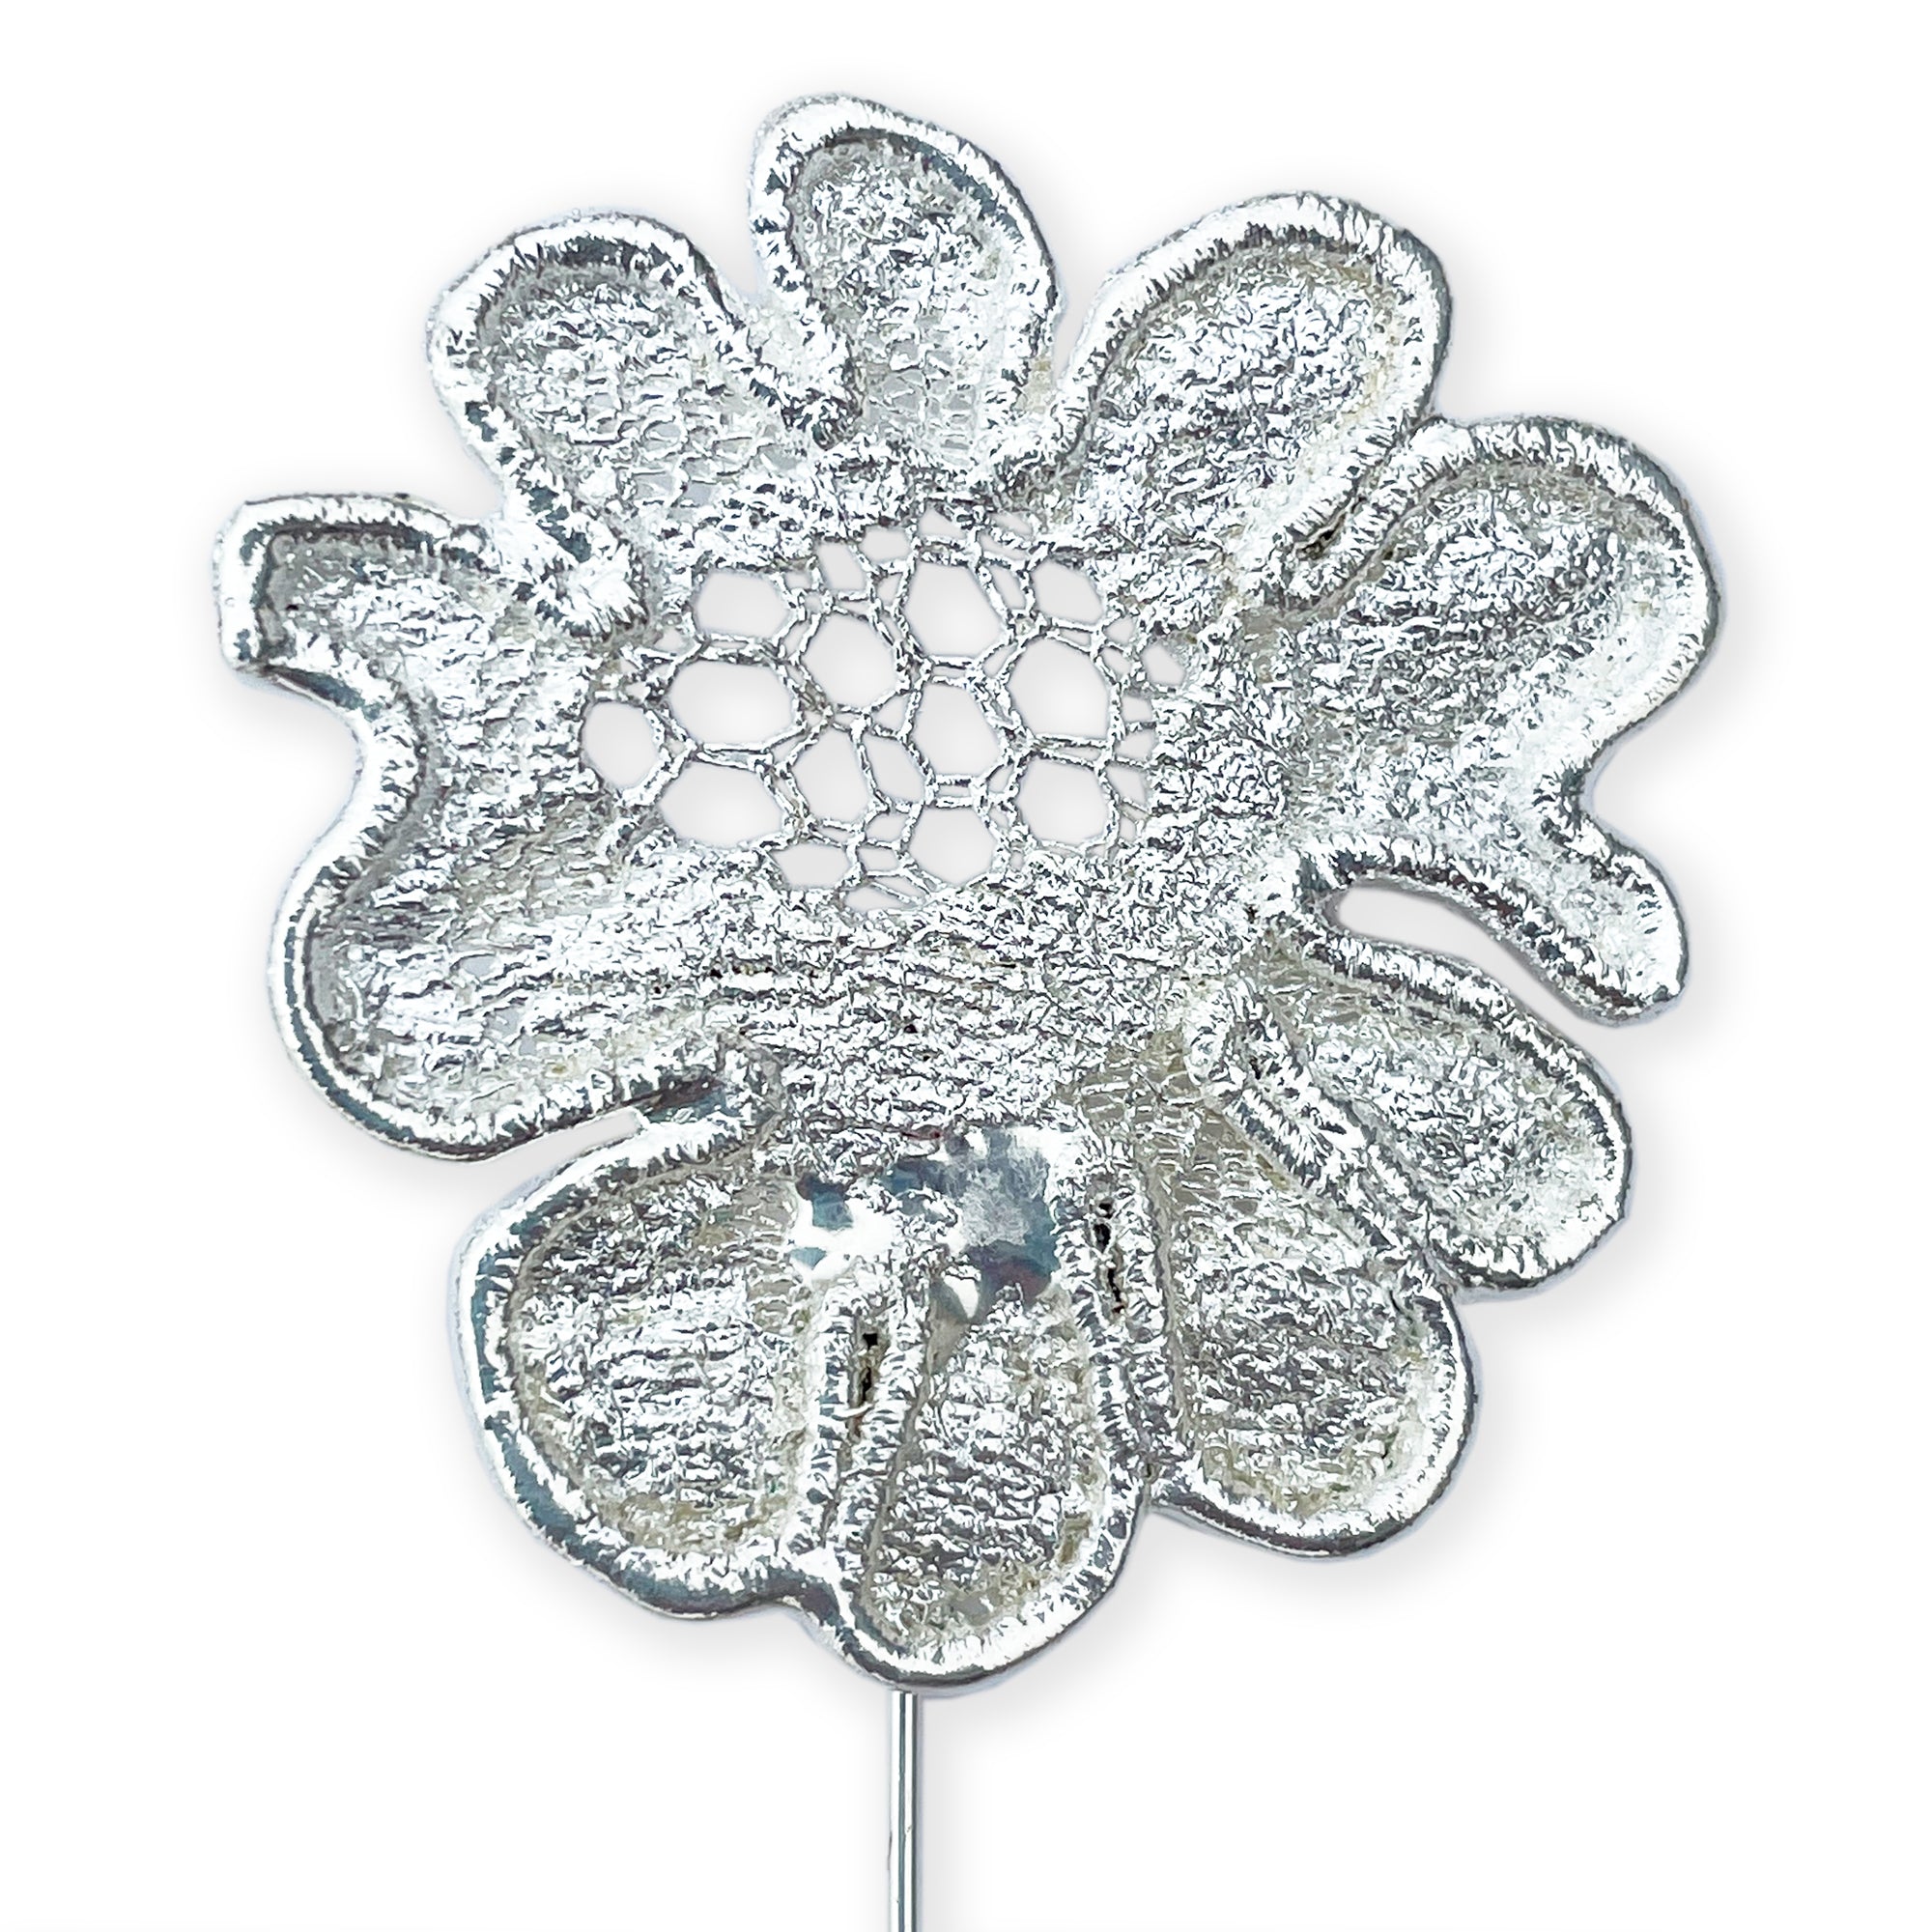 Lapel Pin in the shape of a rose made from wedding dress lace dipped in sterling silver.